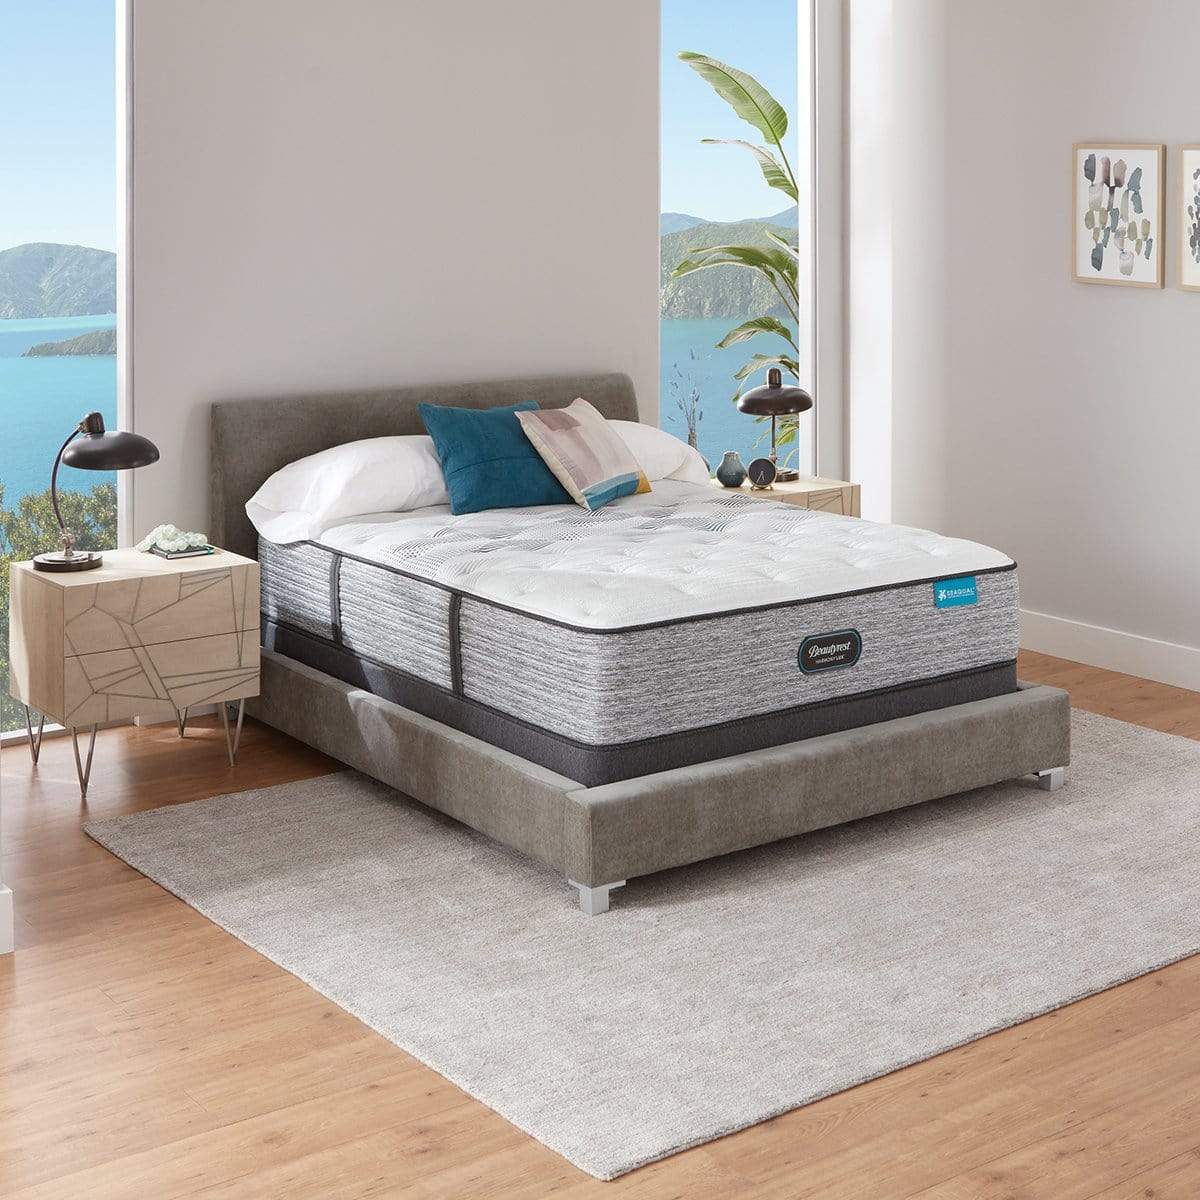 Picture of Beautyrest Harmony Lux Plush Mattress